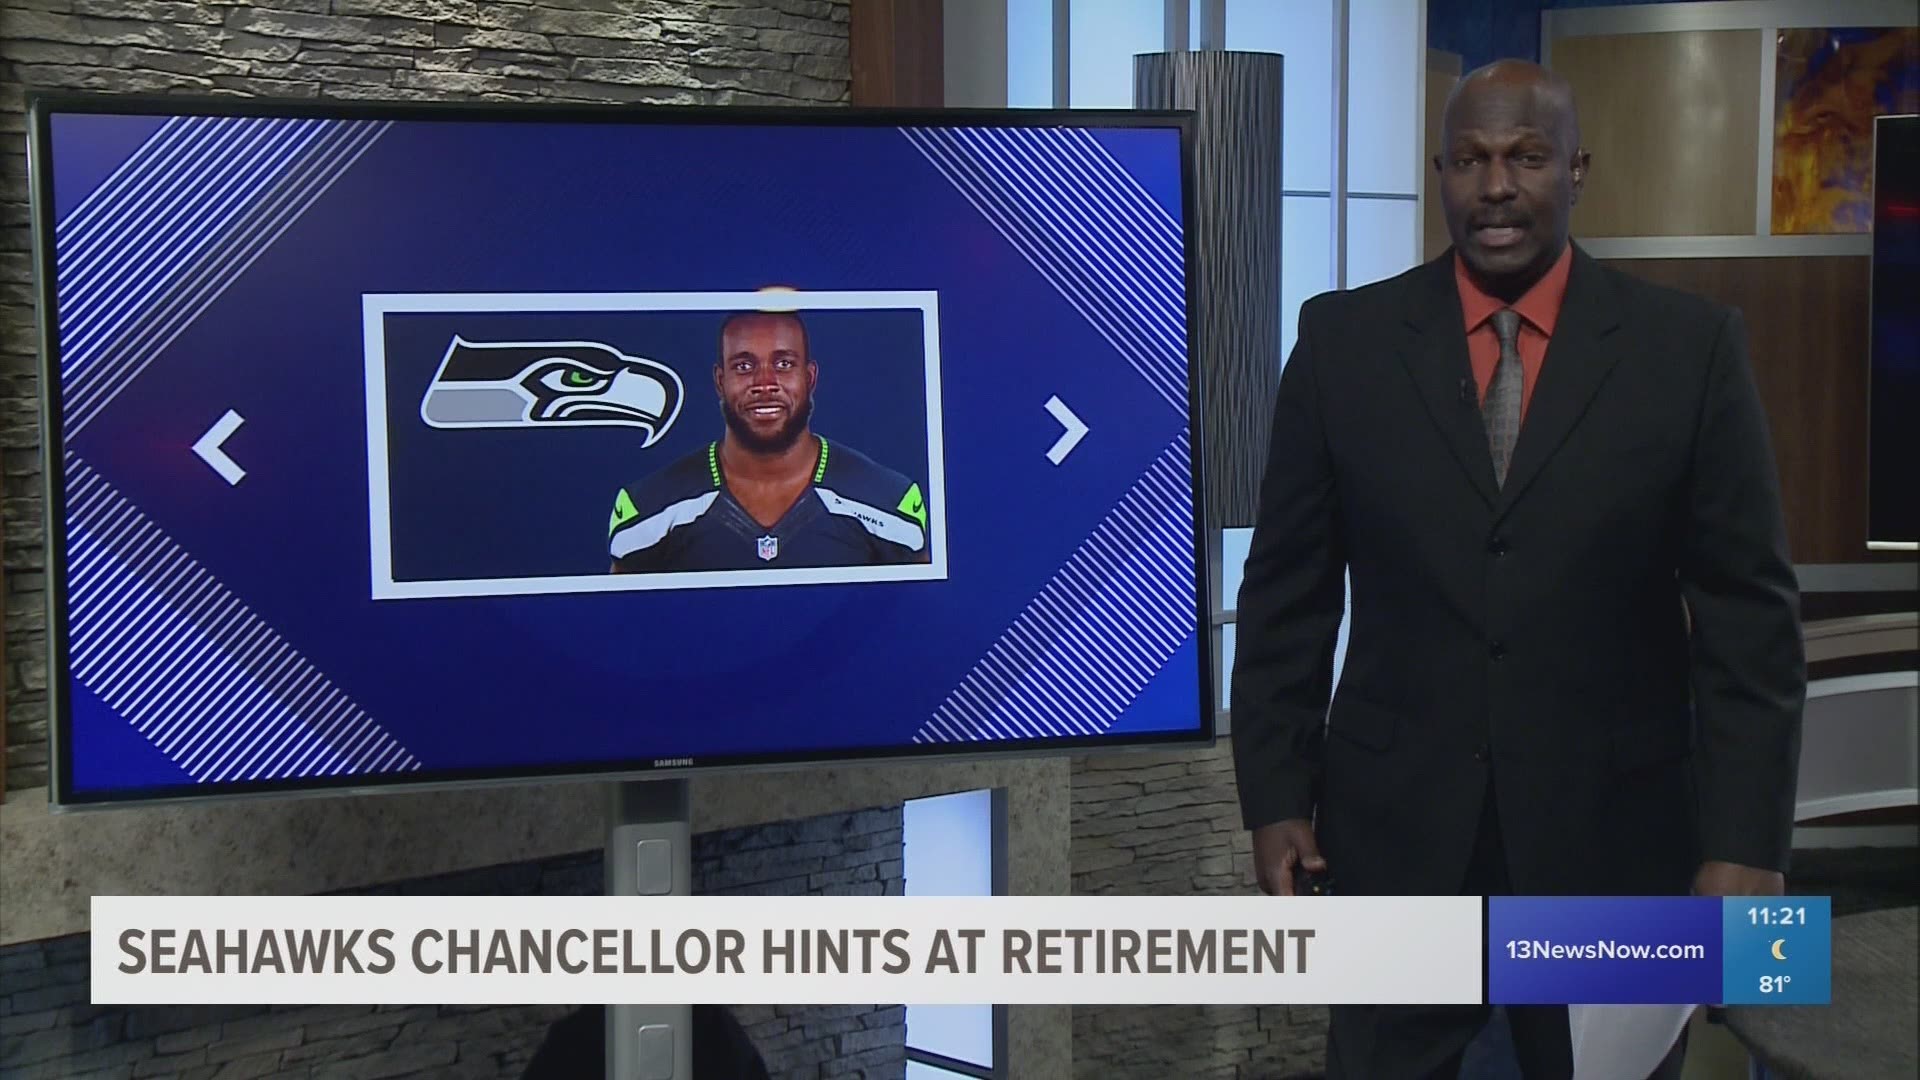 Norfolk native and Seattle safety, Kam Chancellor hinted through his Twitter account, he's likely retiring from the NFL after 8 season.